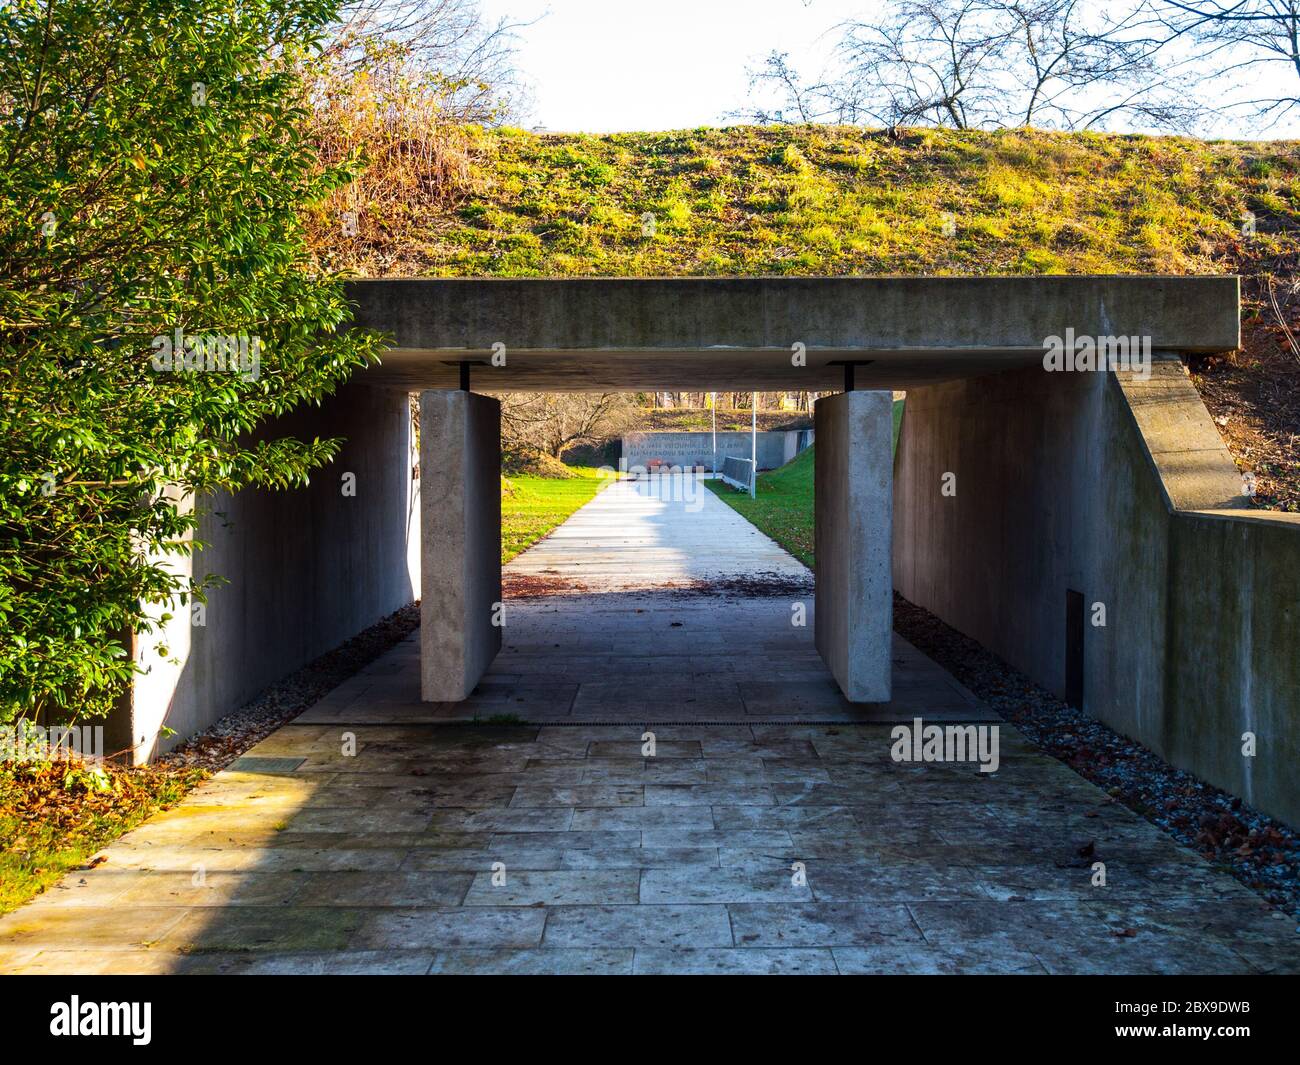 PRAGUE, CZECH REPUBLIC - DECEMBER 9, 2017: Entrance to former Kobylisy Shooting Range, Prague, Czech Republic. Place of mass executions during WWII by Nazis after the assassination of Reinhard Heydrich. Stock Photo